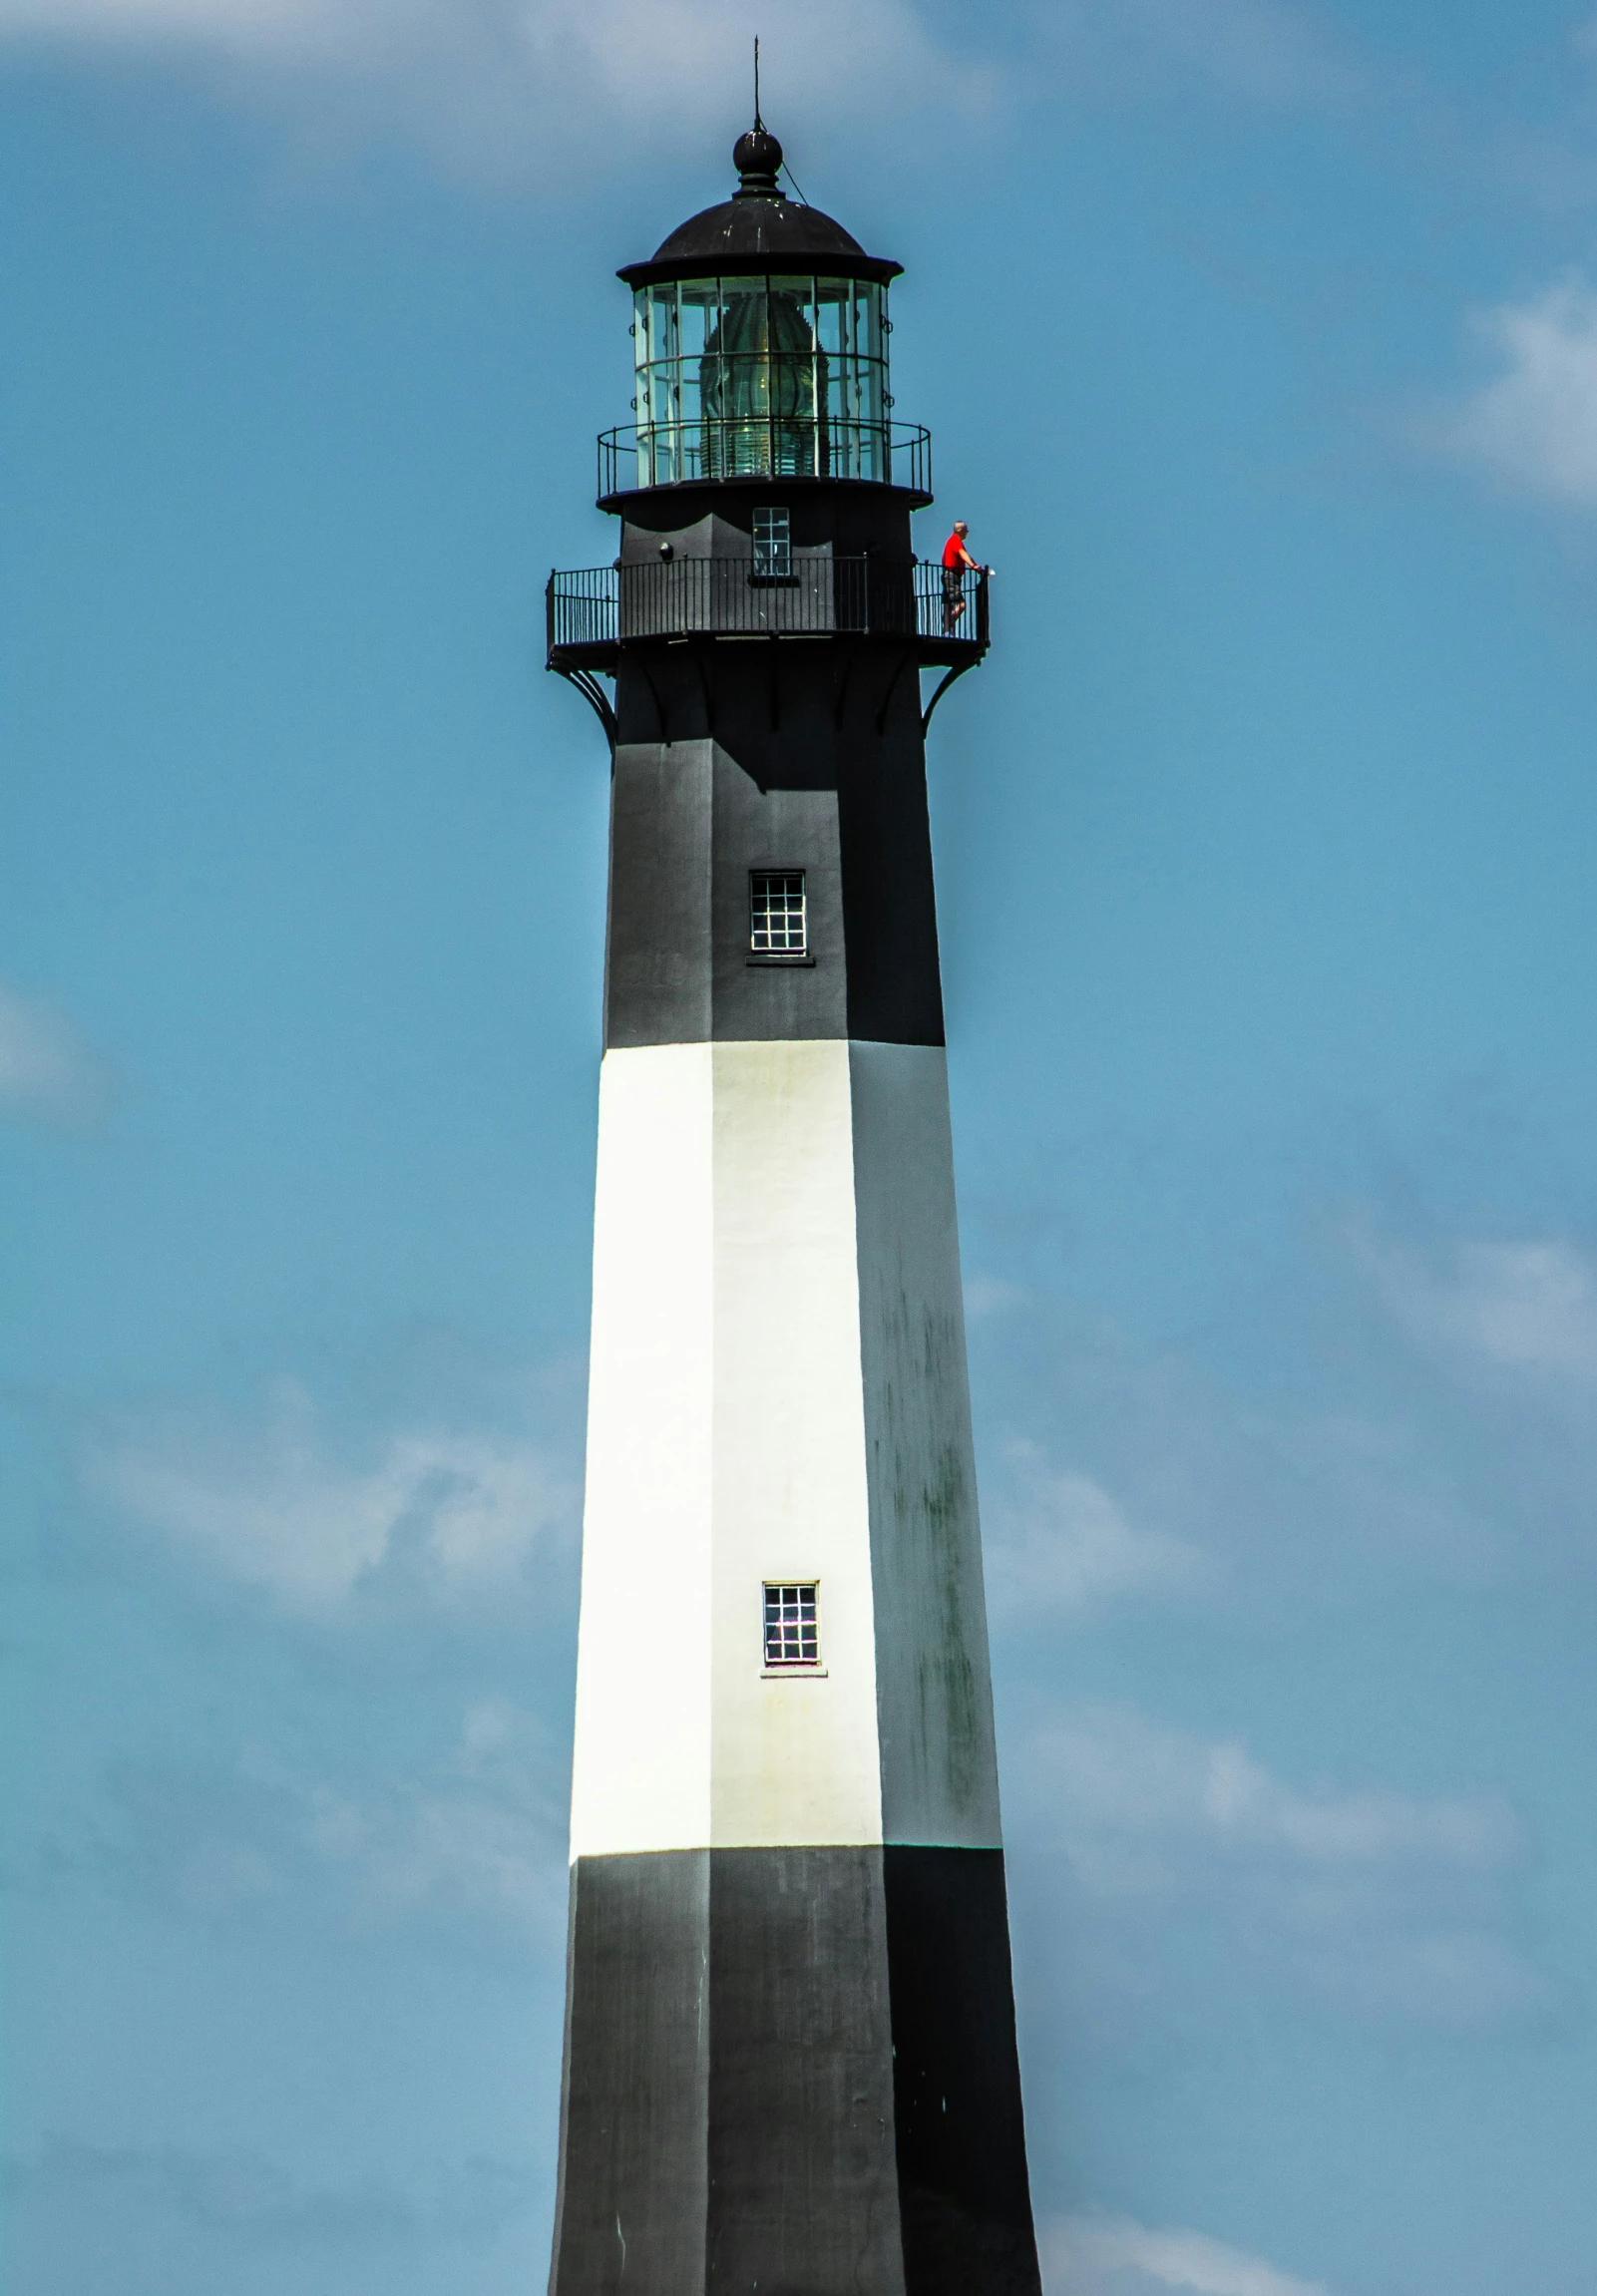 the white and black striped lighthouse looks like it has a little red on it